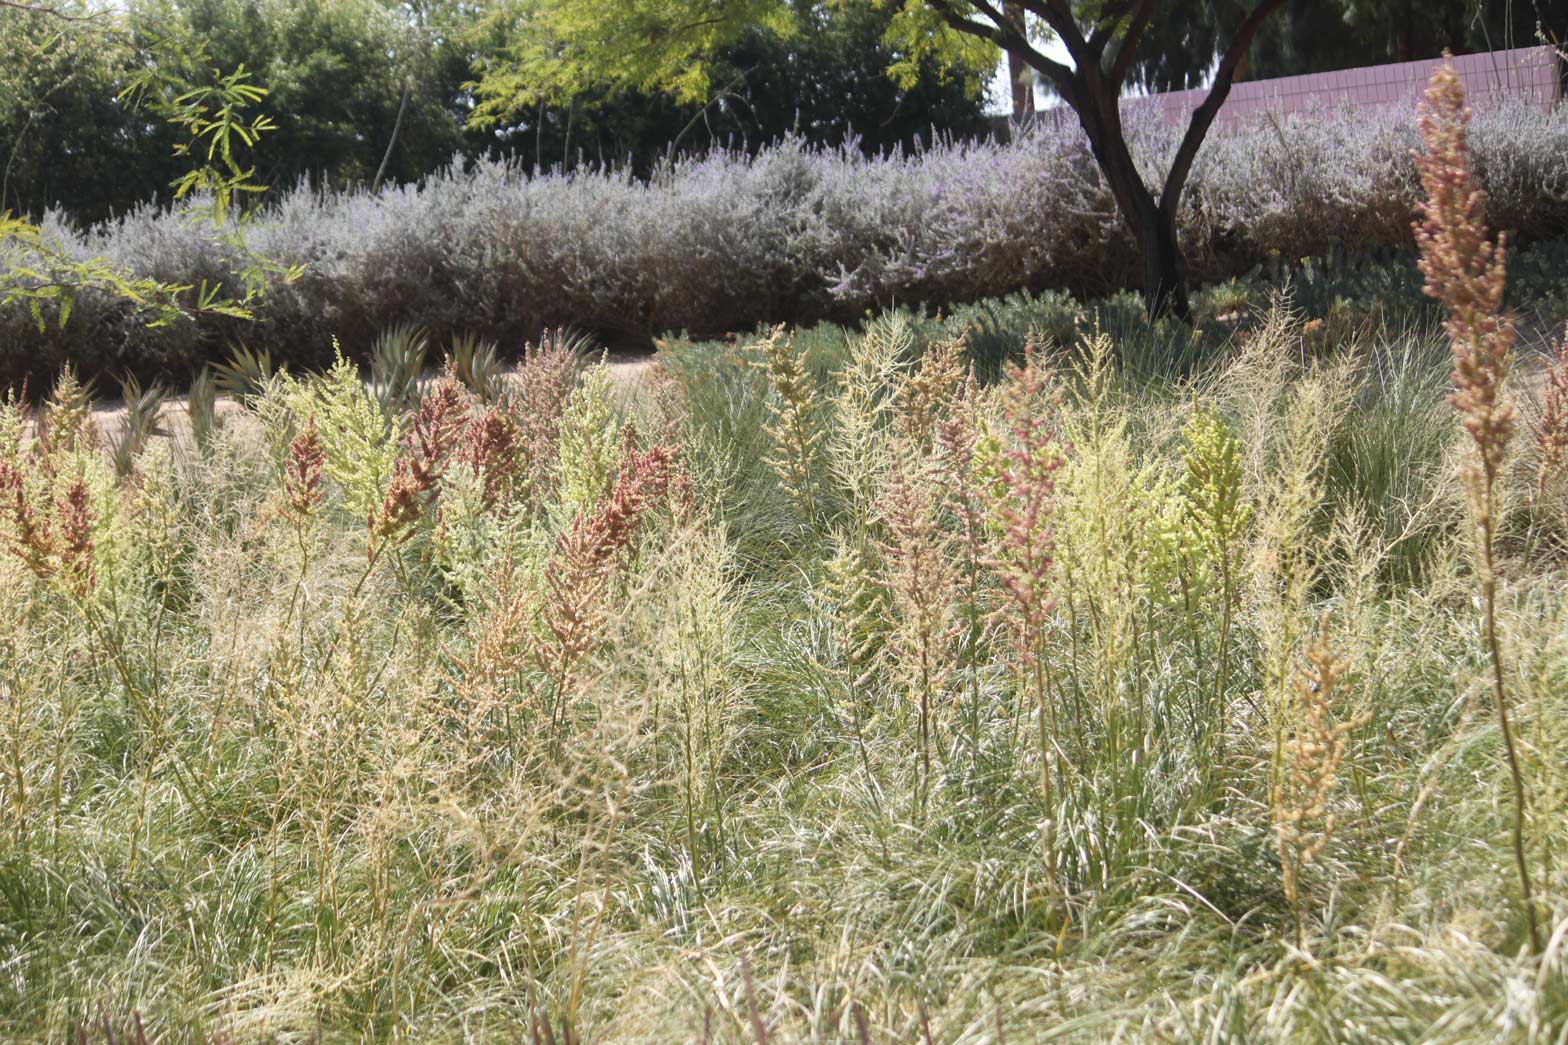 A group Texas Bear Grasses blooming.